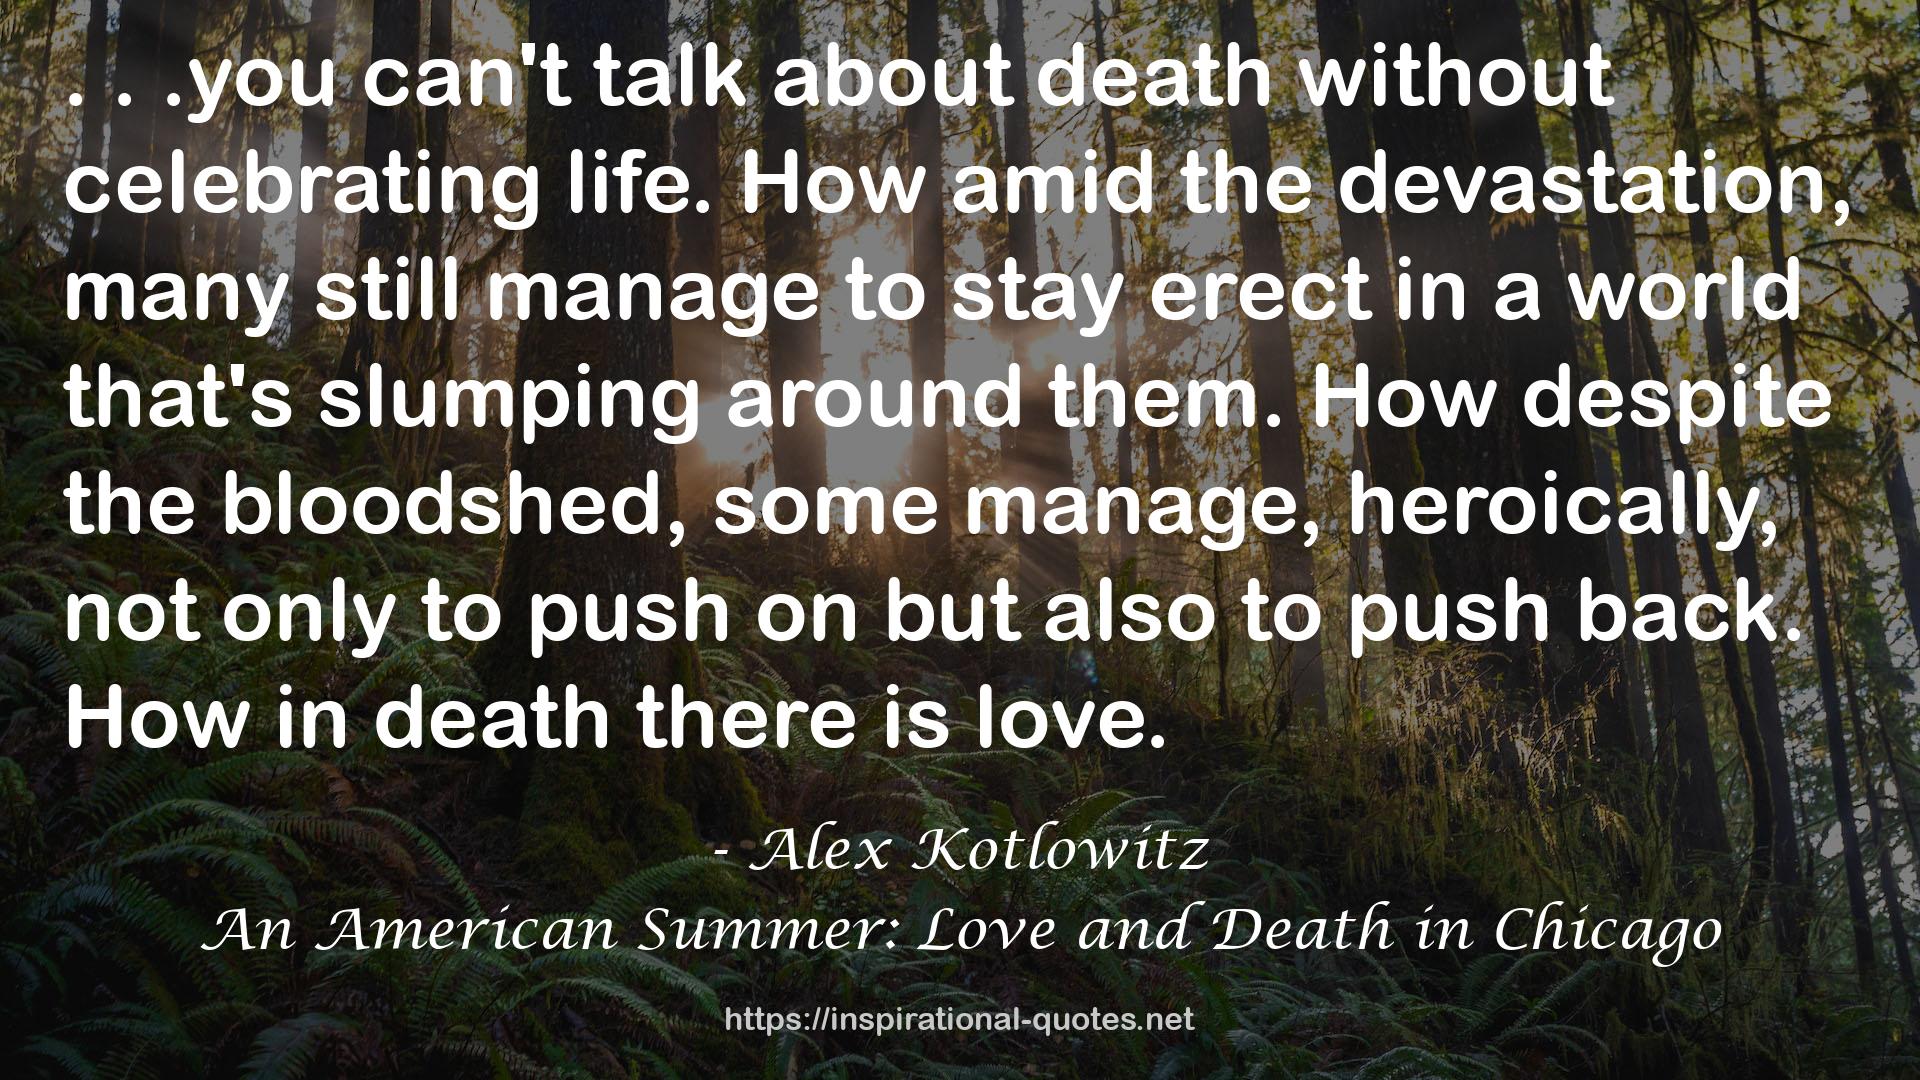 An American Summer: Love and Death in Chicago QUOTES